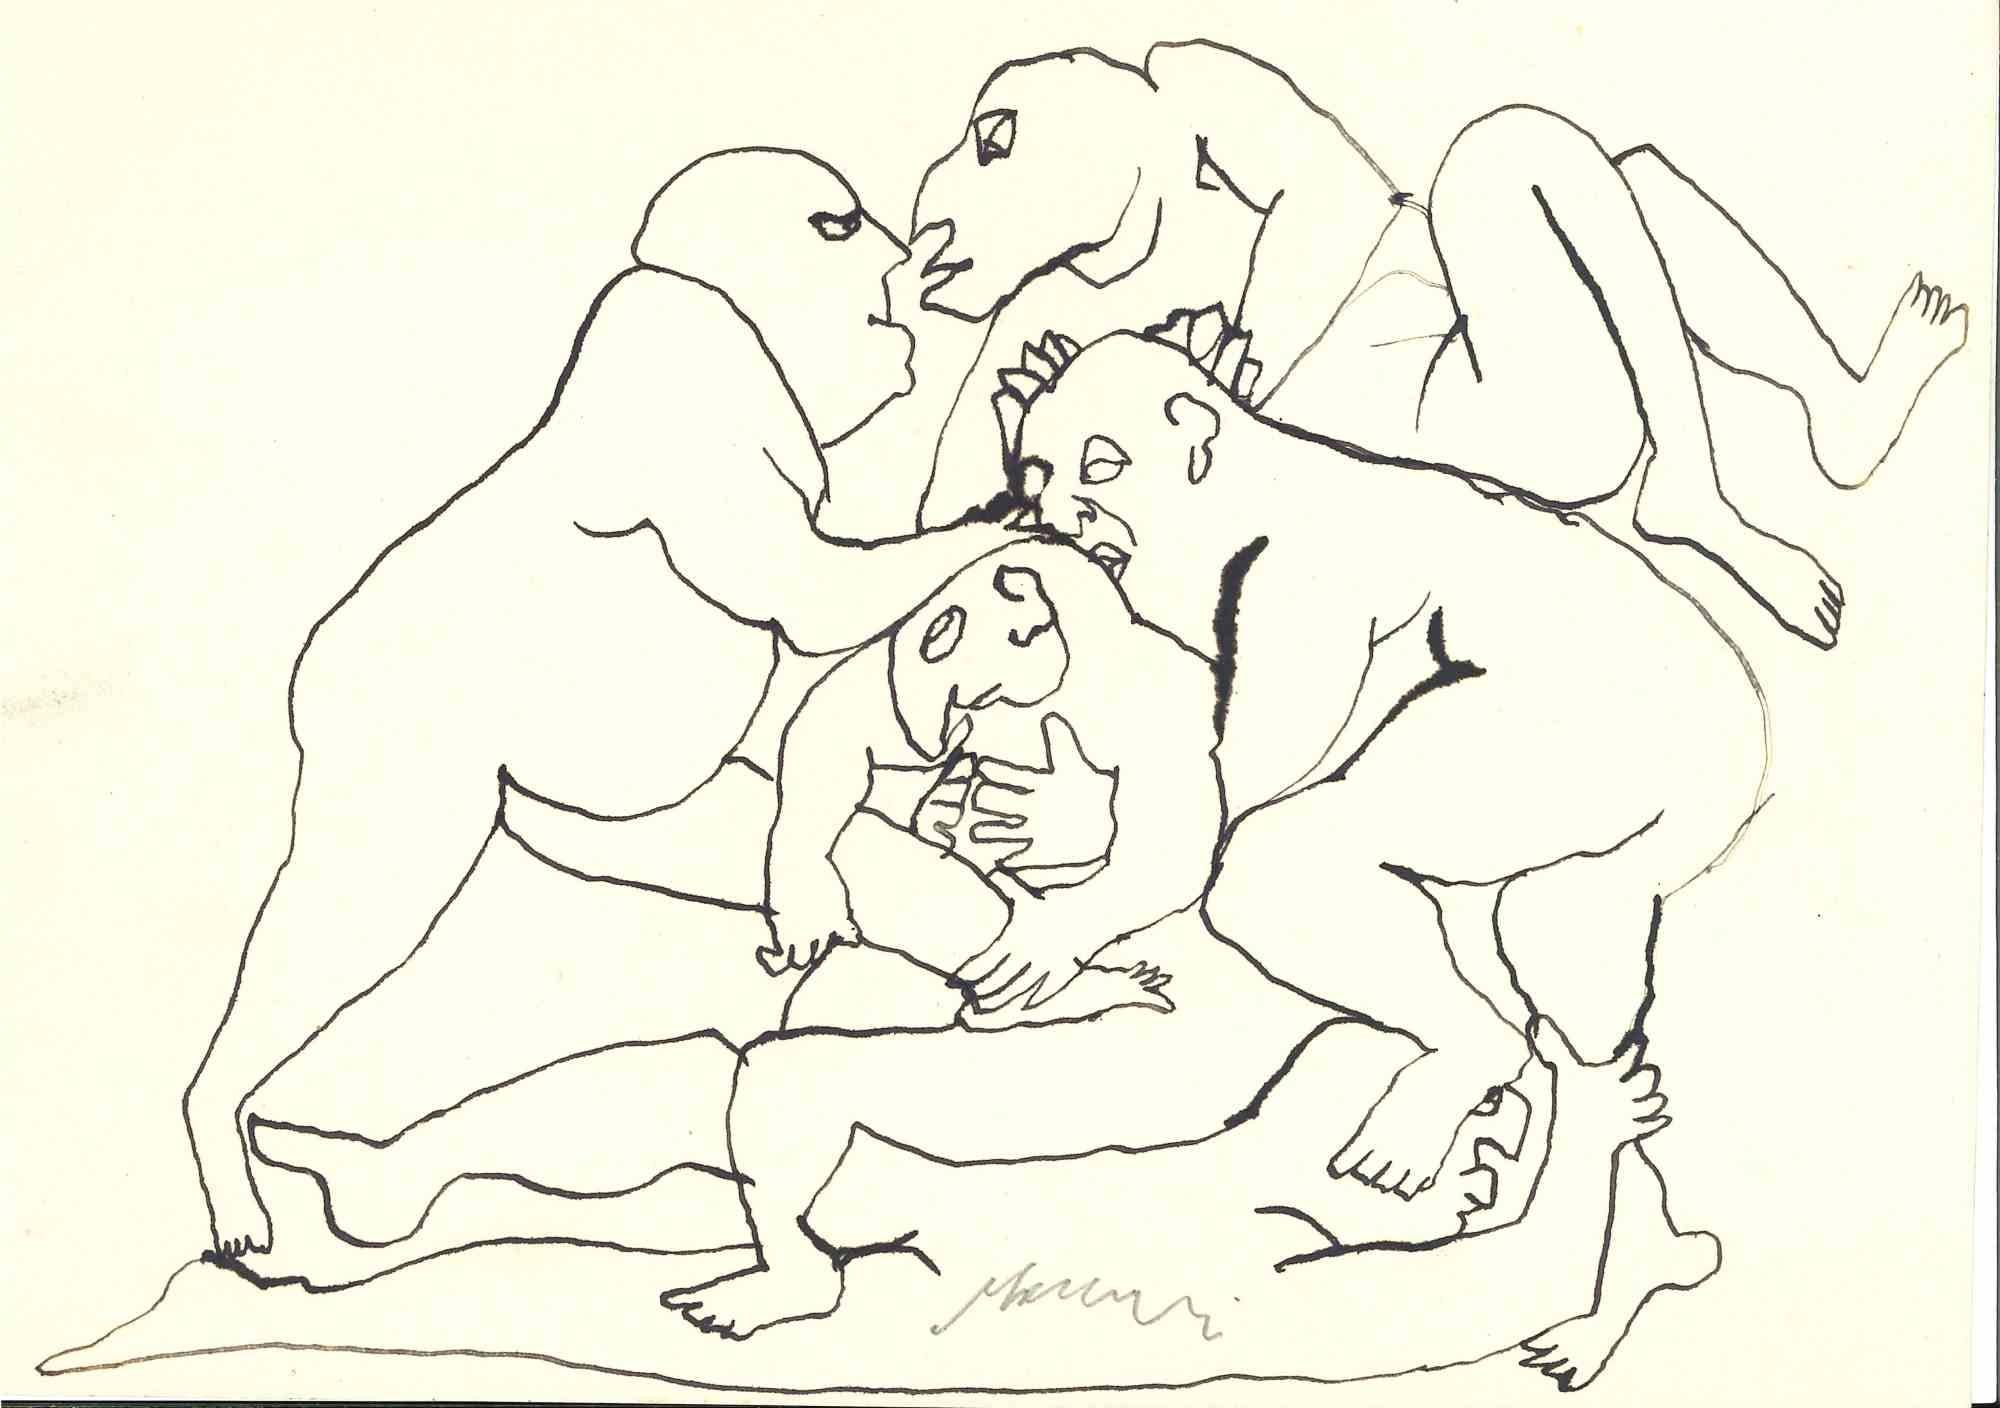 Fight is a china ink drawing realized by Mino Maccari  (1924-1989) in the Mid-20th Century.

Hand-signed.

Good conditions with slight foxing.

Mino Maccari (Siena, 1924-Rome, June 16, 1989) was an Italian writer, painter, engraver and journalist,